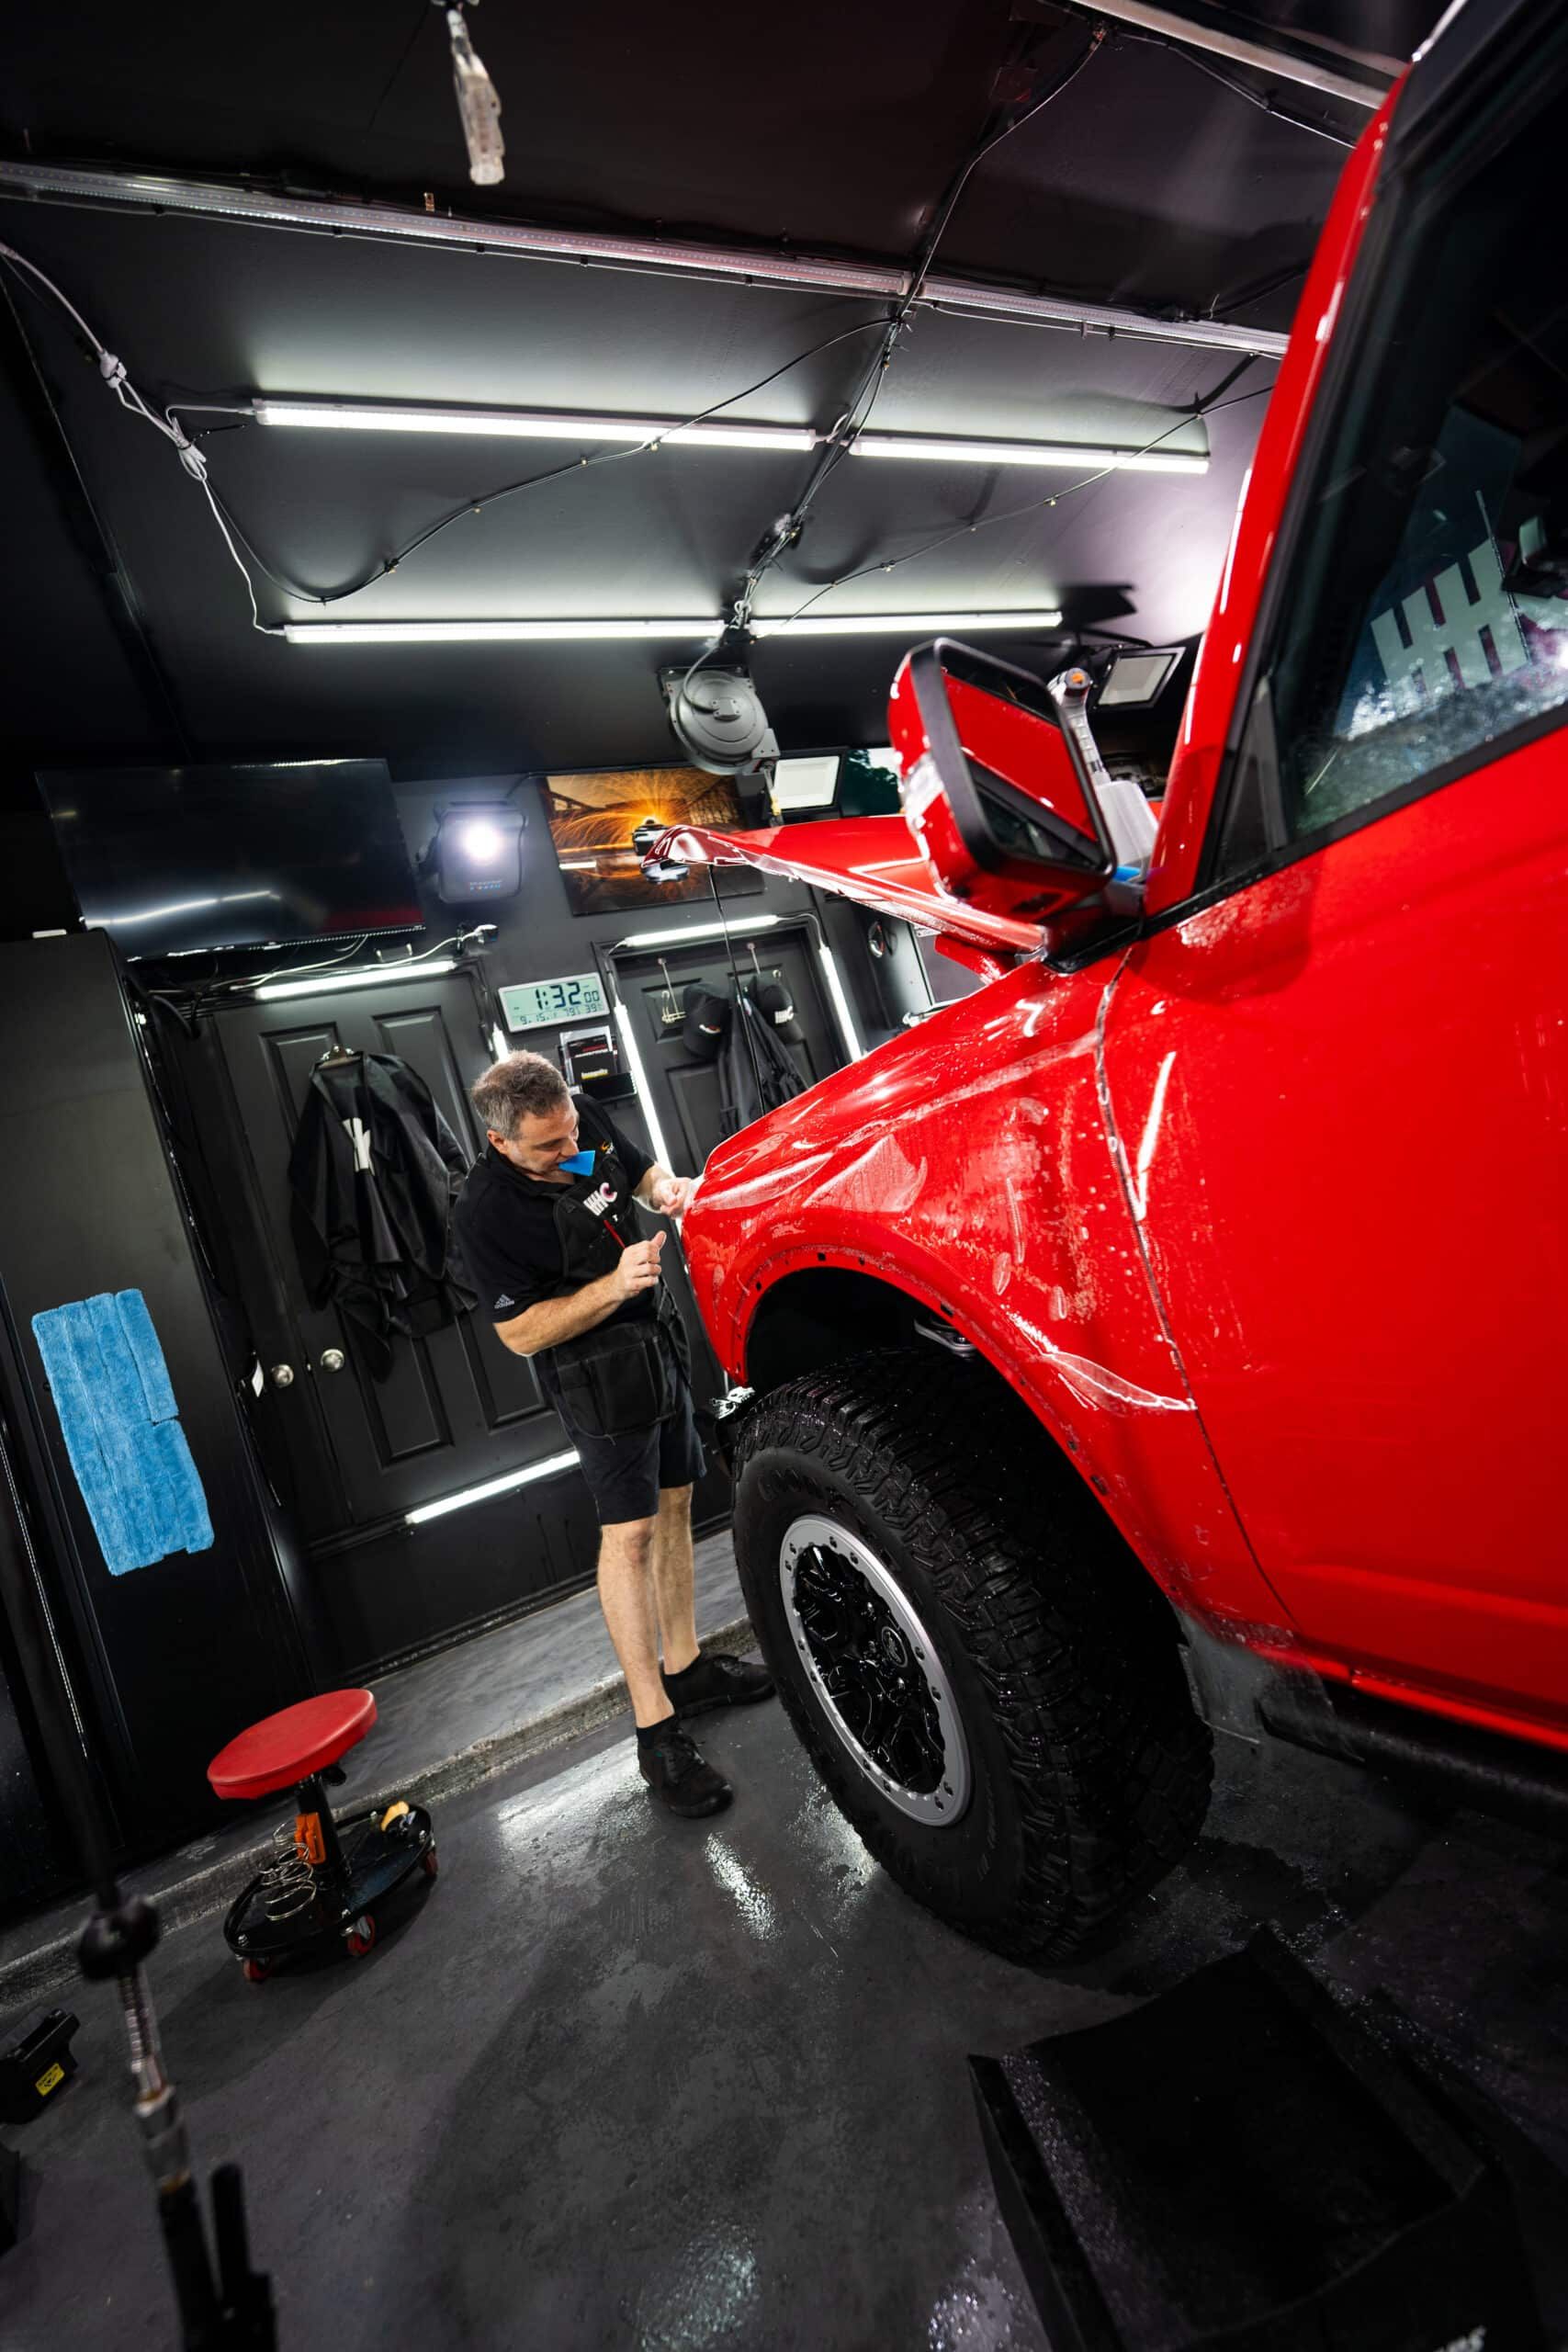 A man is standing next to a red truck in a garage.